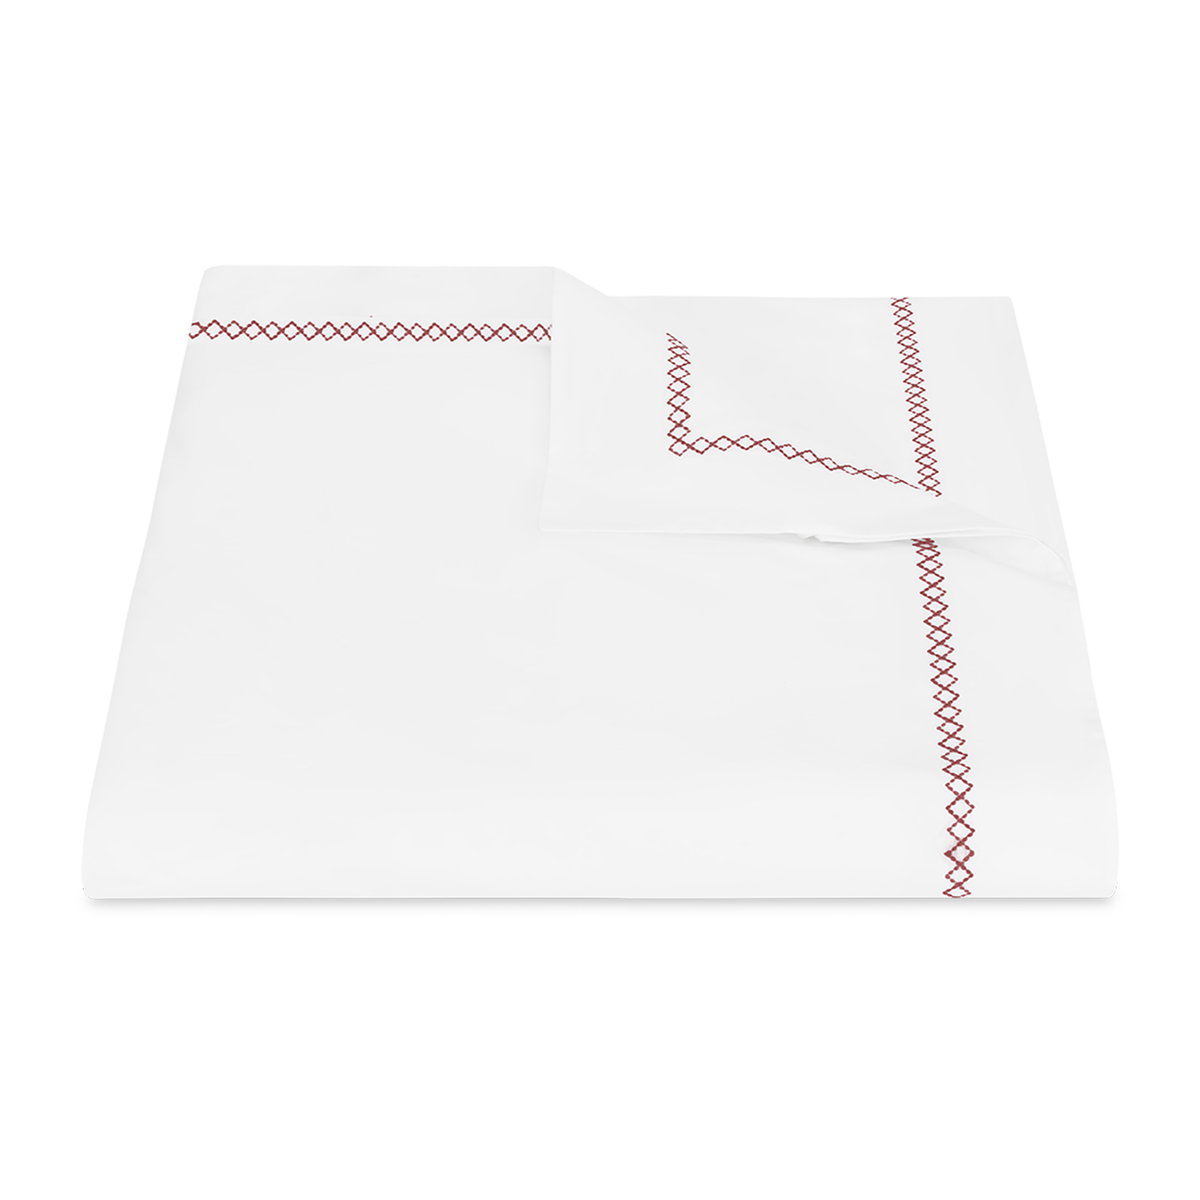 Duvet Cover of Matouk Hatch Bedding in Redberry Color